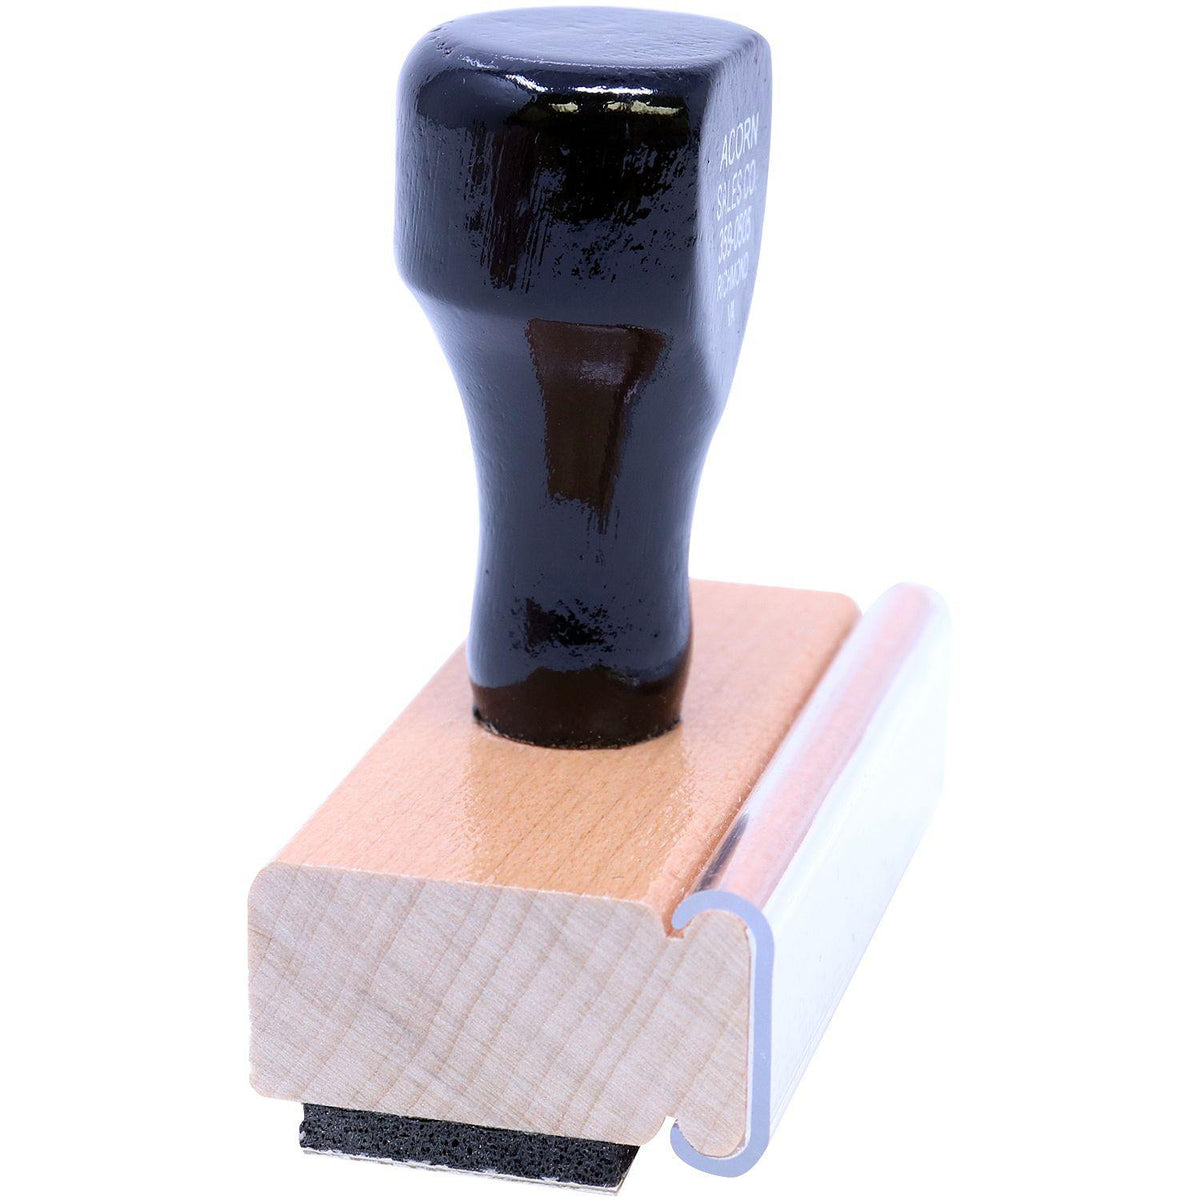 Side View of Large Chart Thinned On Rubber Stamp at an Angle